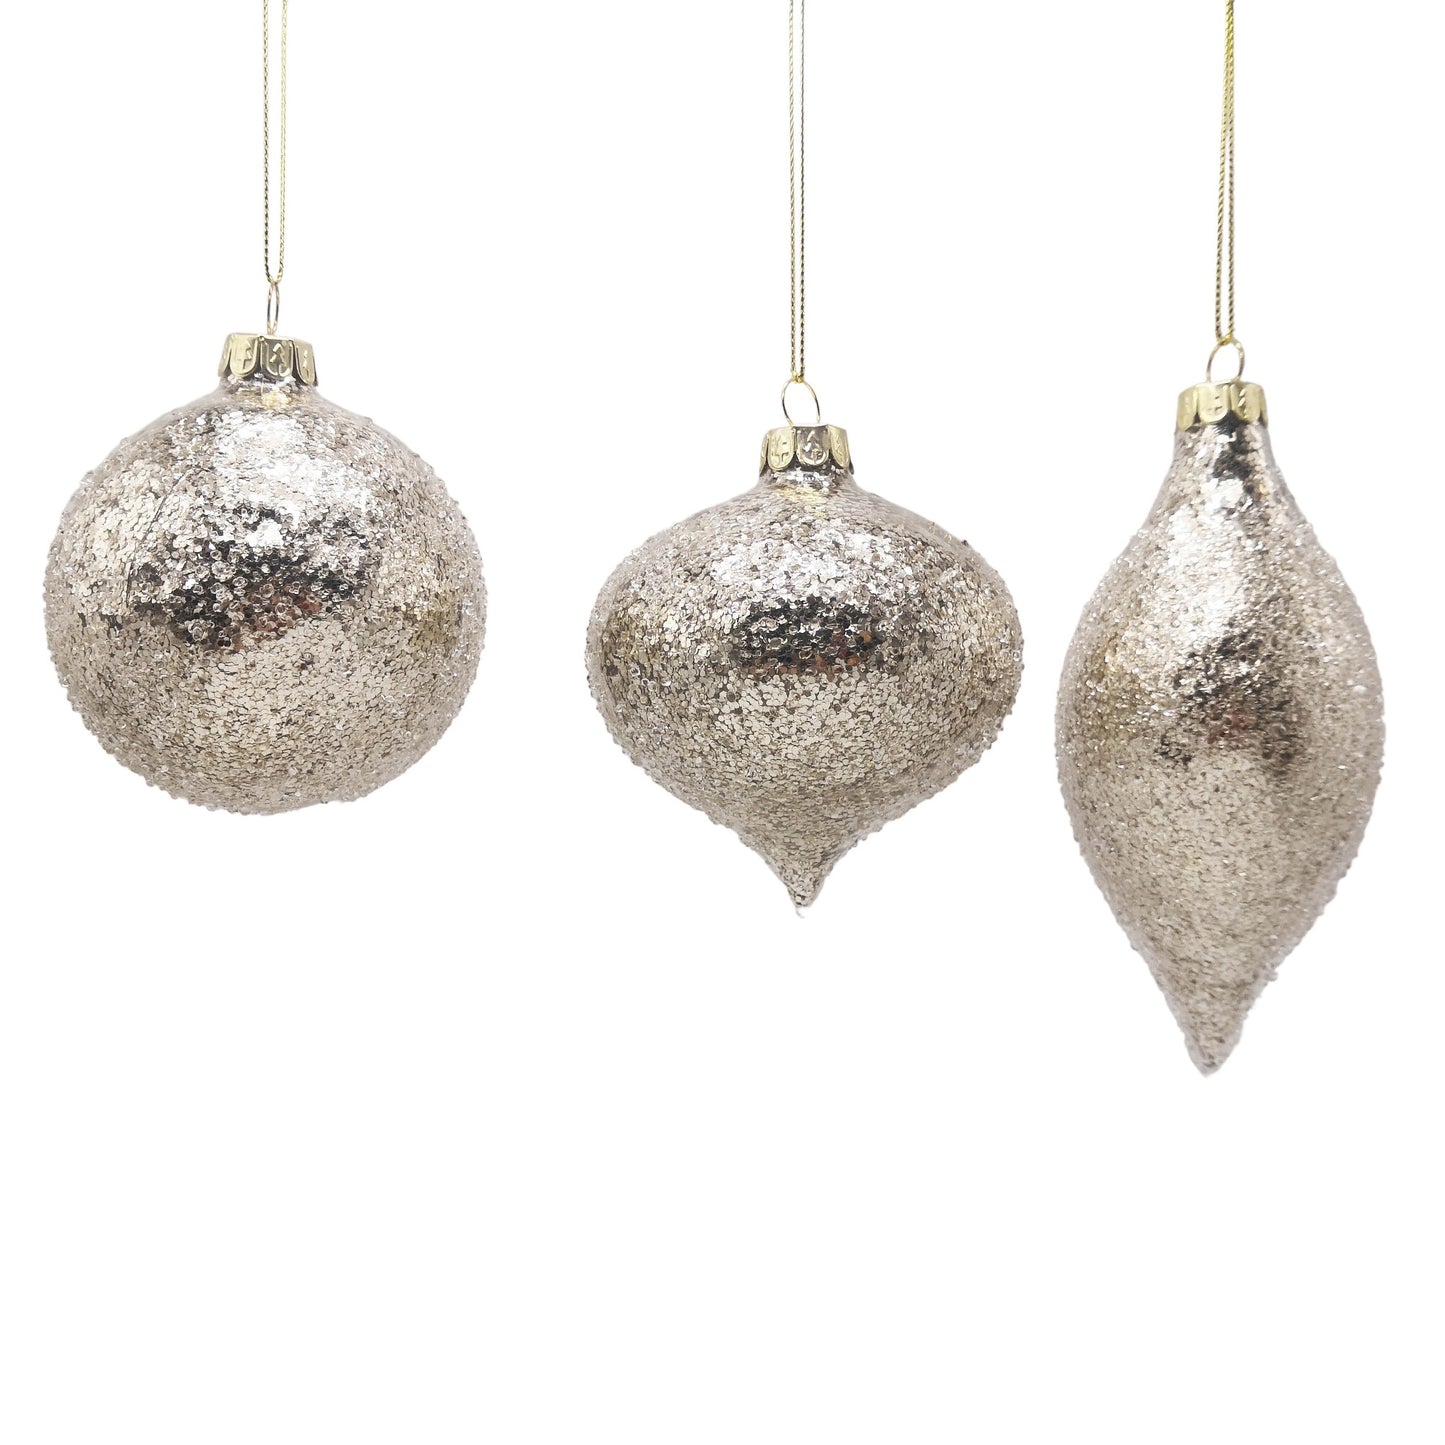 PURE CHRISTMAS HANGING BAUBLE ORNAMENT GLASS SPECKLE CHAMPAGNE ROUND 8CM